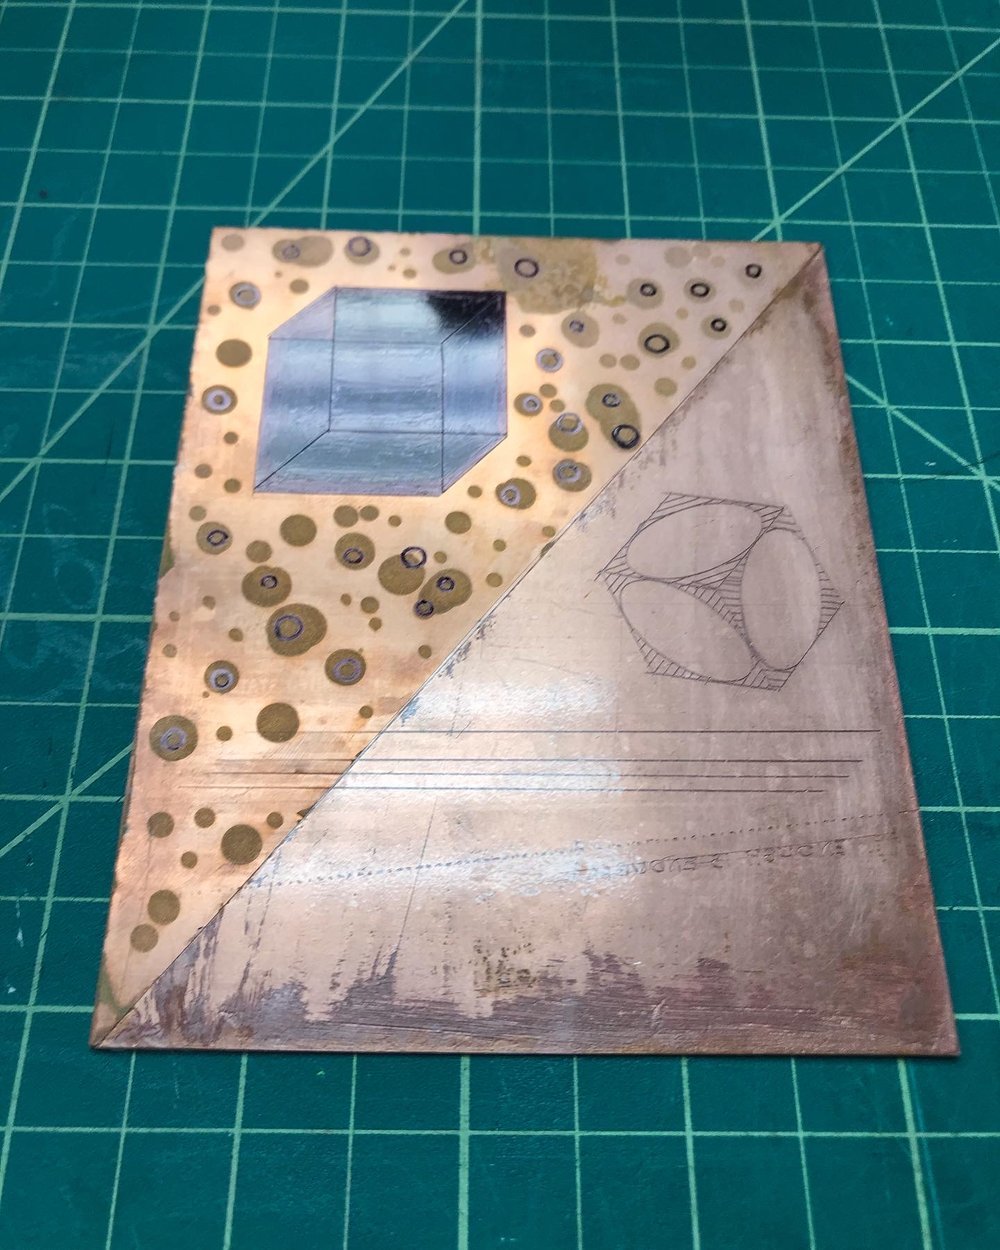  This is my first copper plate I used to sample different etching techniques. 